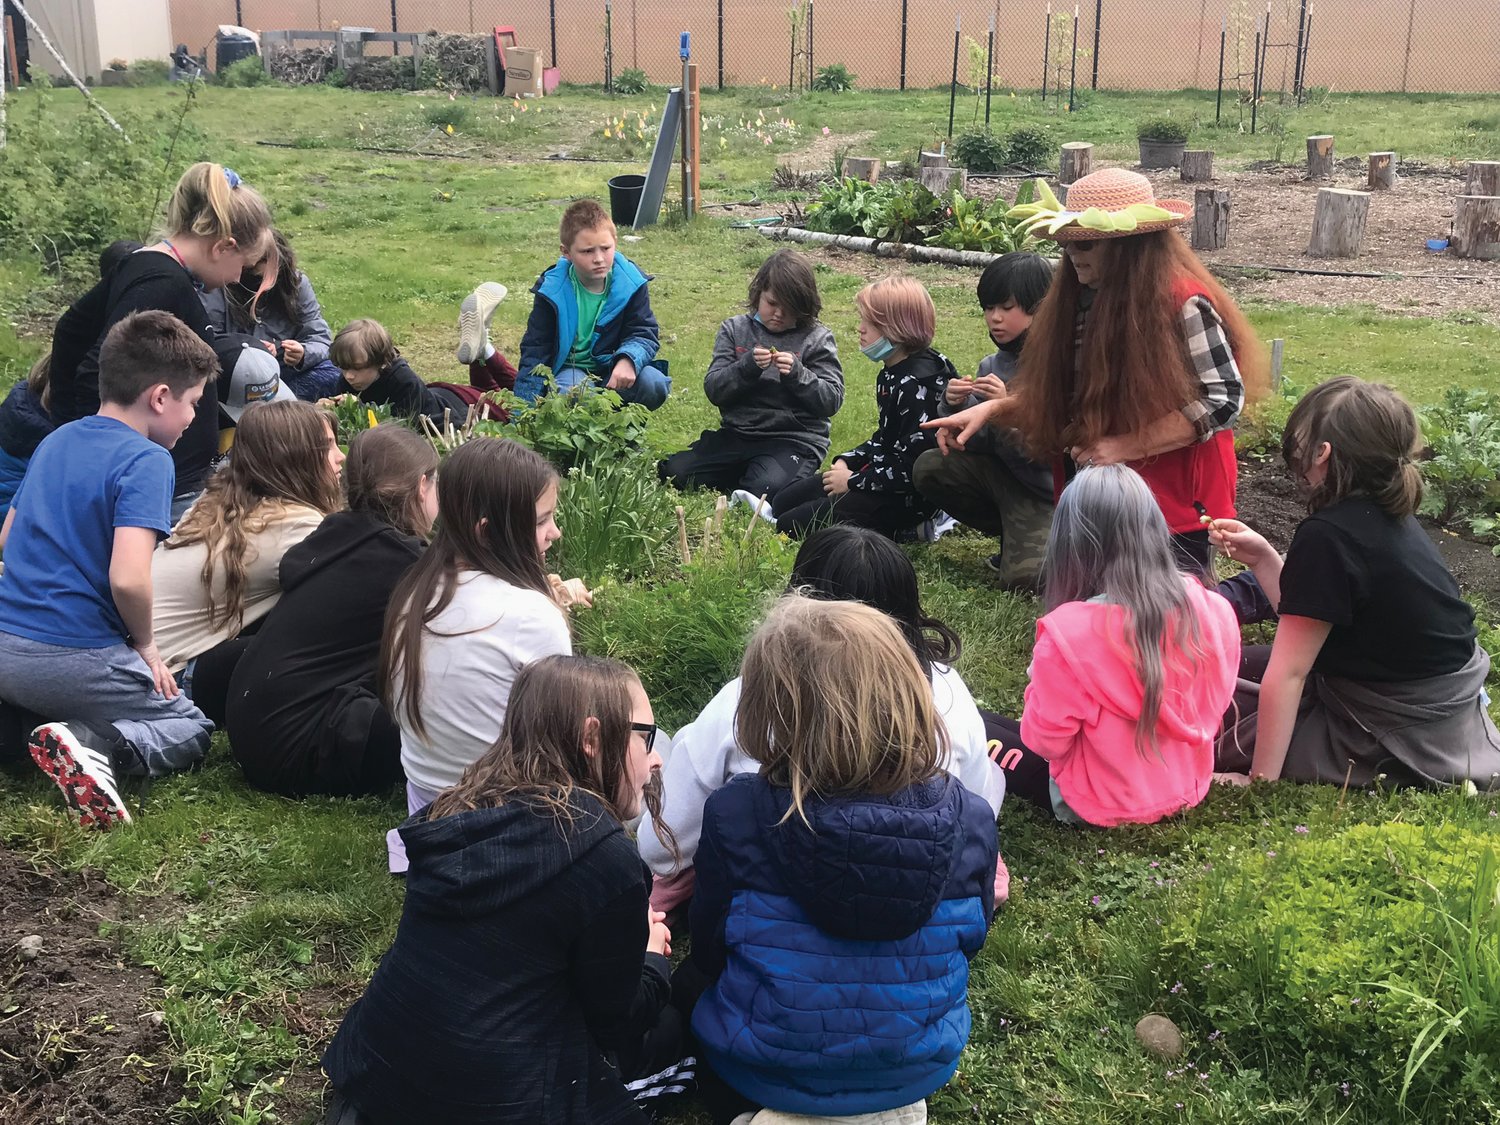 Students learn about culinary and medicinal herbs with guest herbalist Shatoiya De La Tour. Photo courtesy of Chimacum Elementary School.